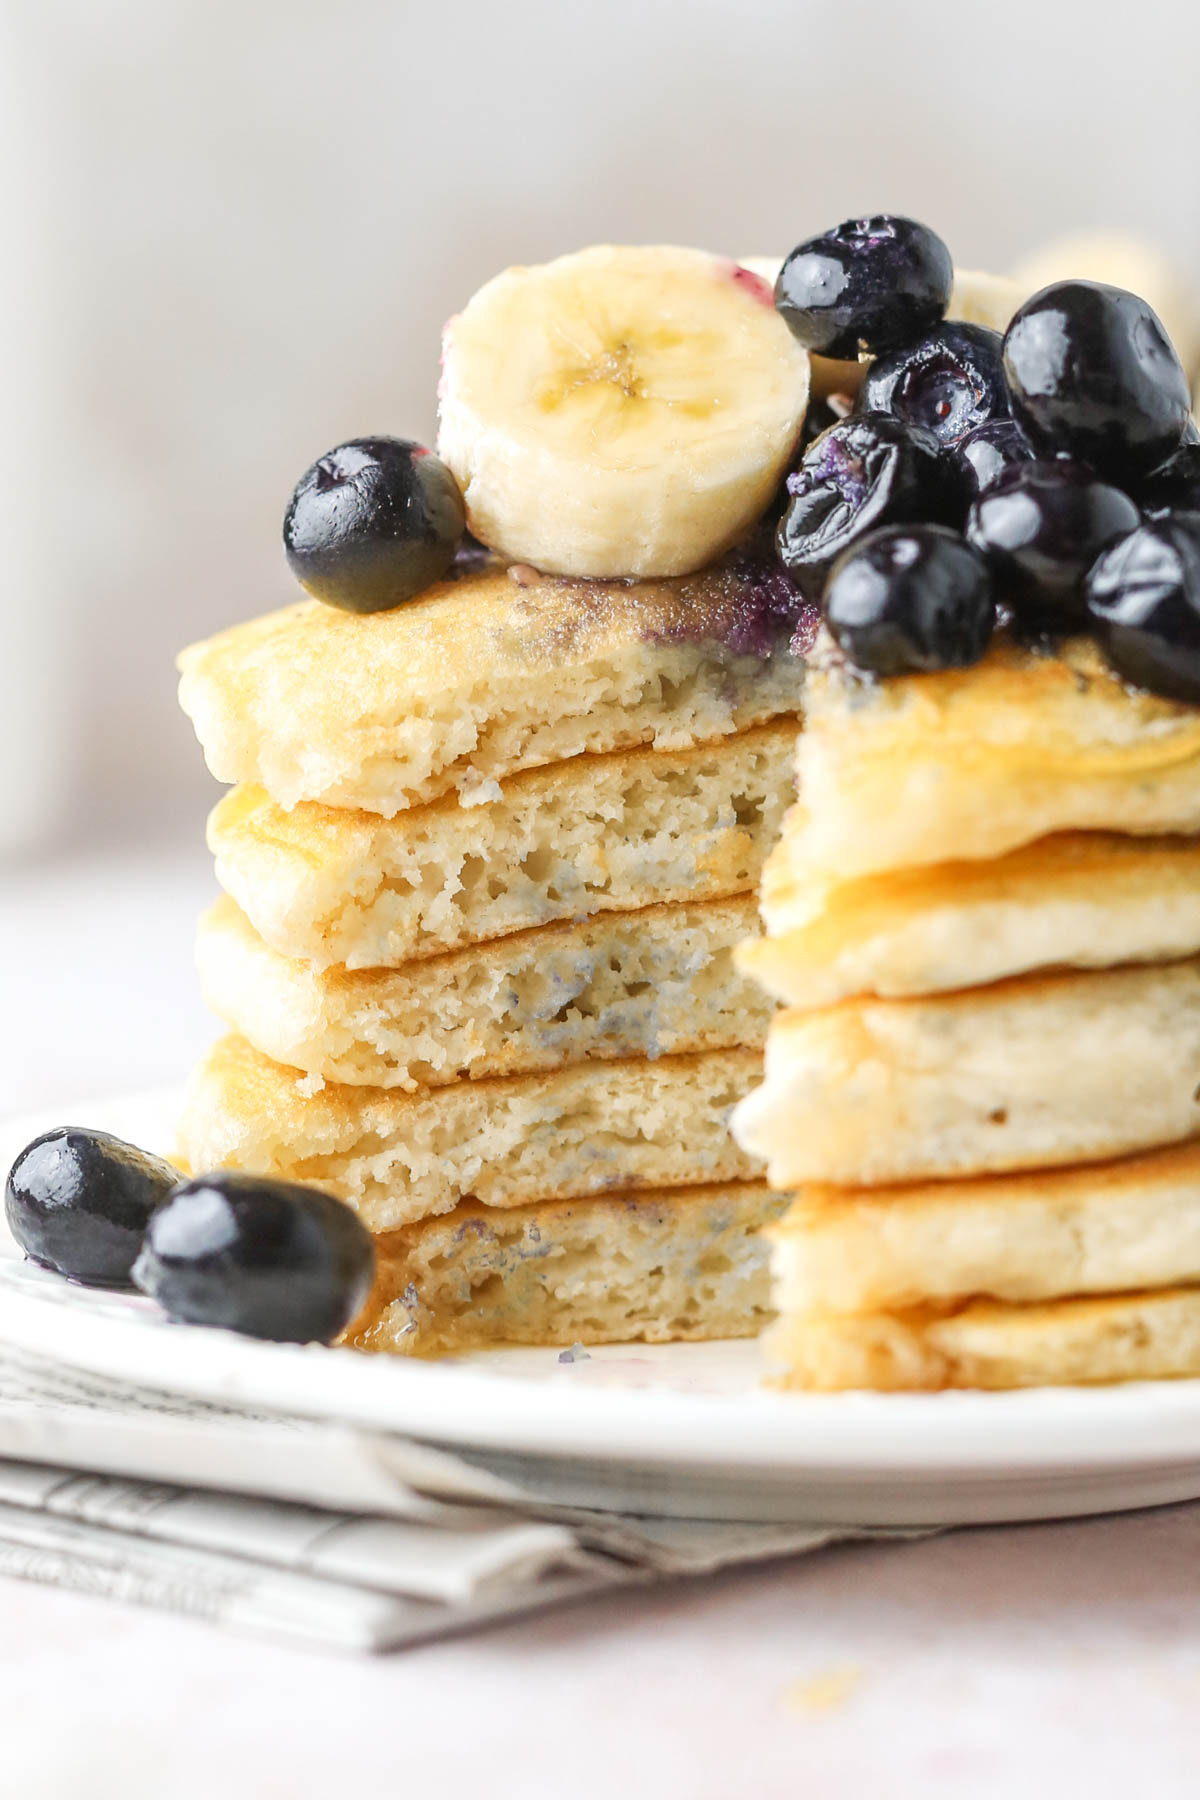 close up of a stack of oat milk pancakes with a portion cut out of the side, showing the soft and fluffy texture inside.